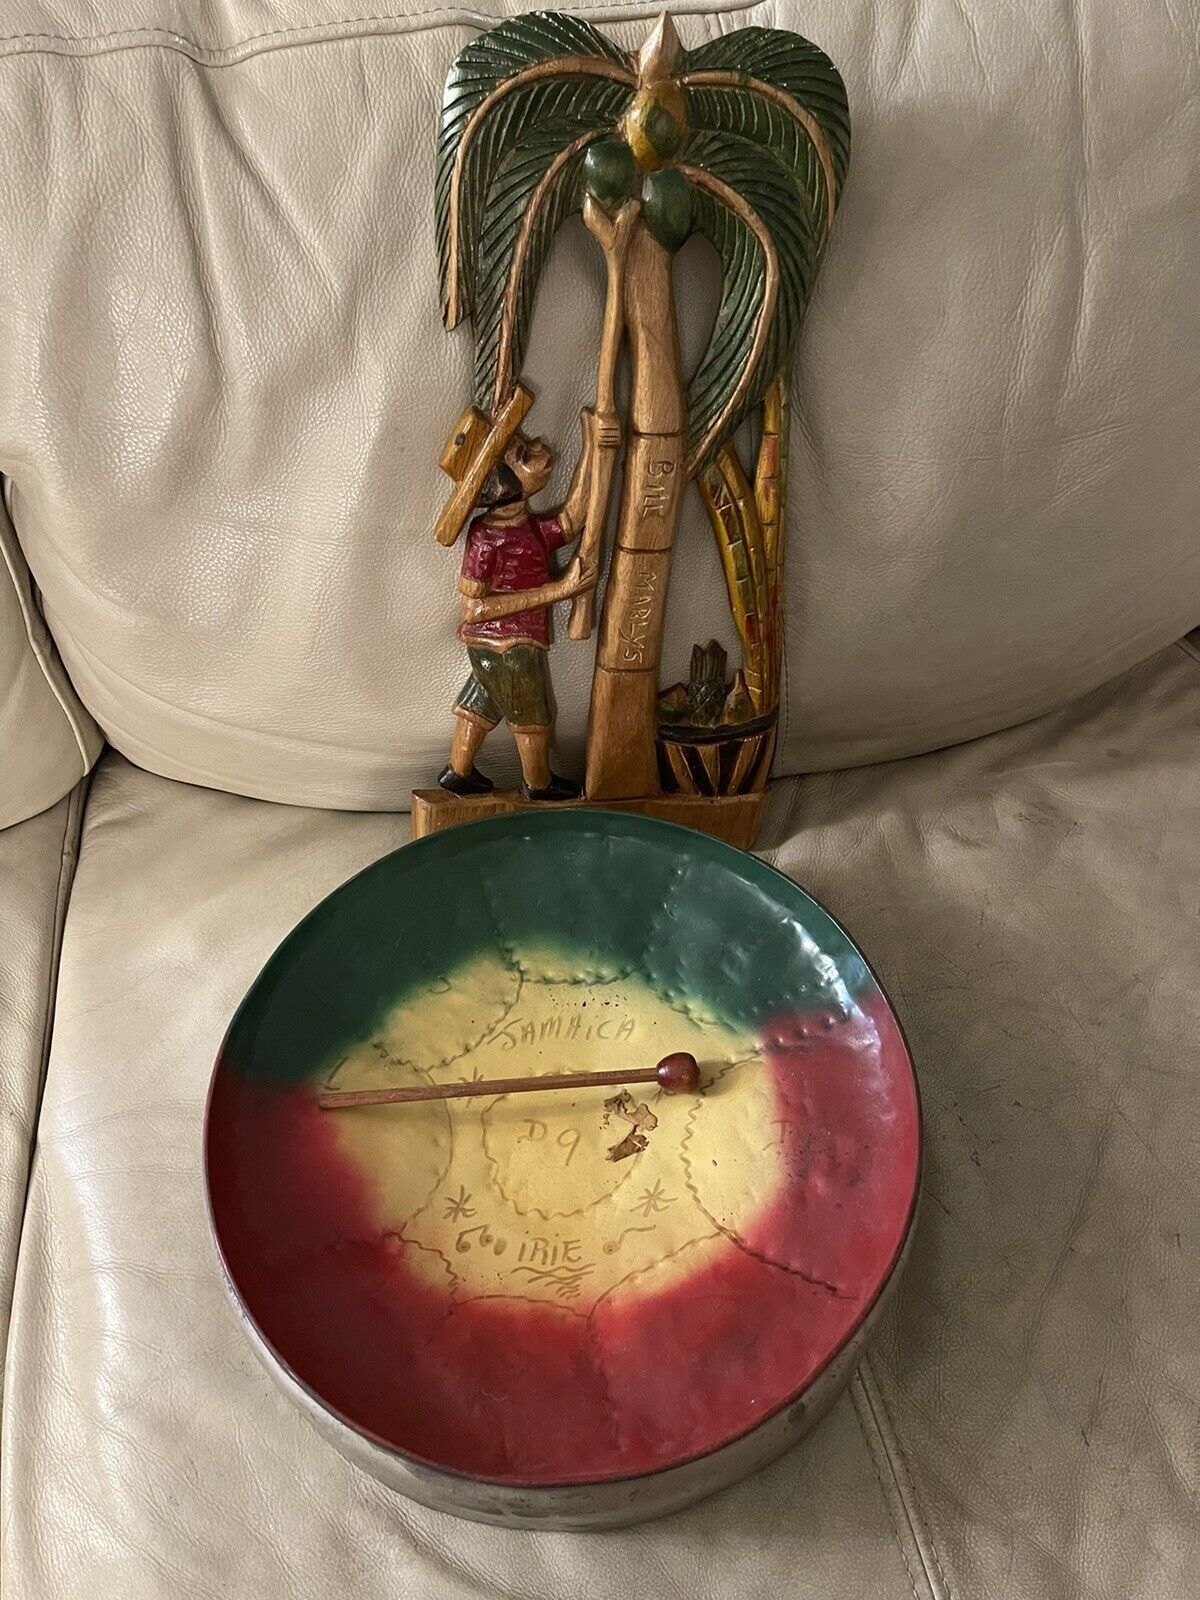 Vintage Jamaican Steel Drum and Bill Marley’s Carved Wall Hanging Jamaica